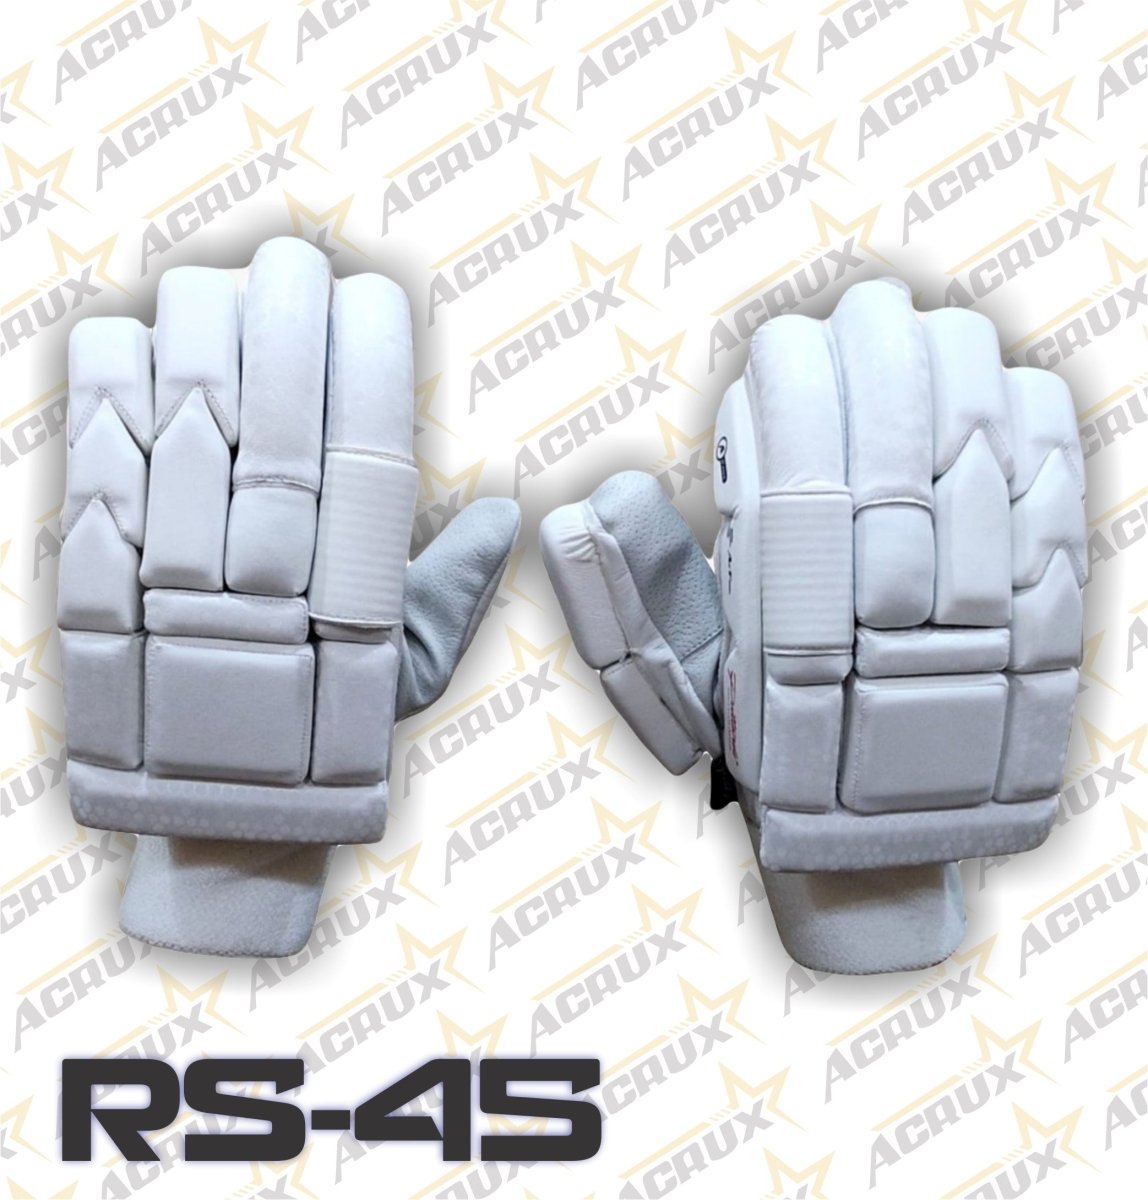 Cricket Batting Gloves RS-45 + Clean Skin Batting Pads Combo - Acrux Sports